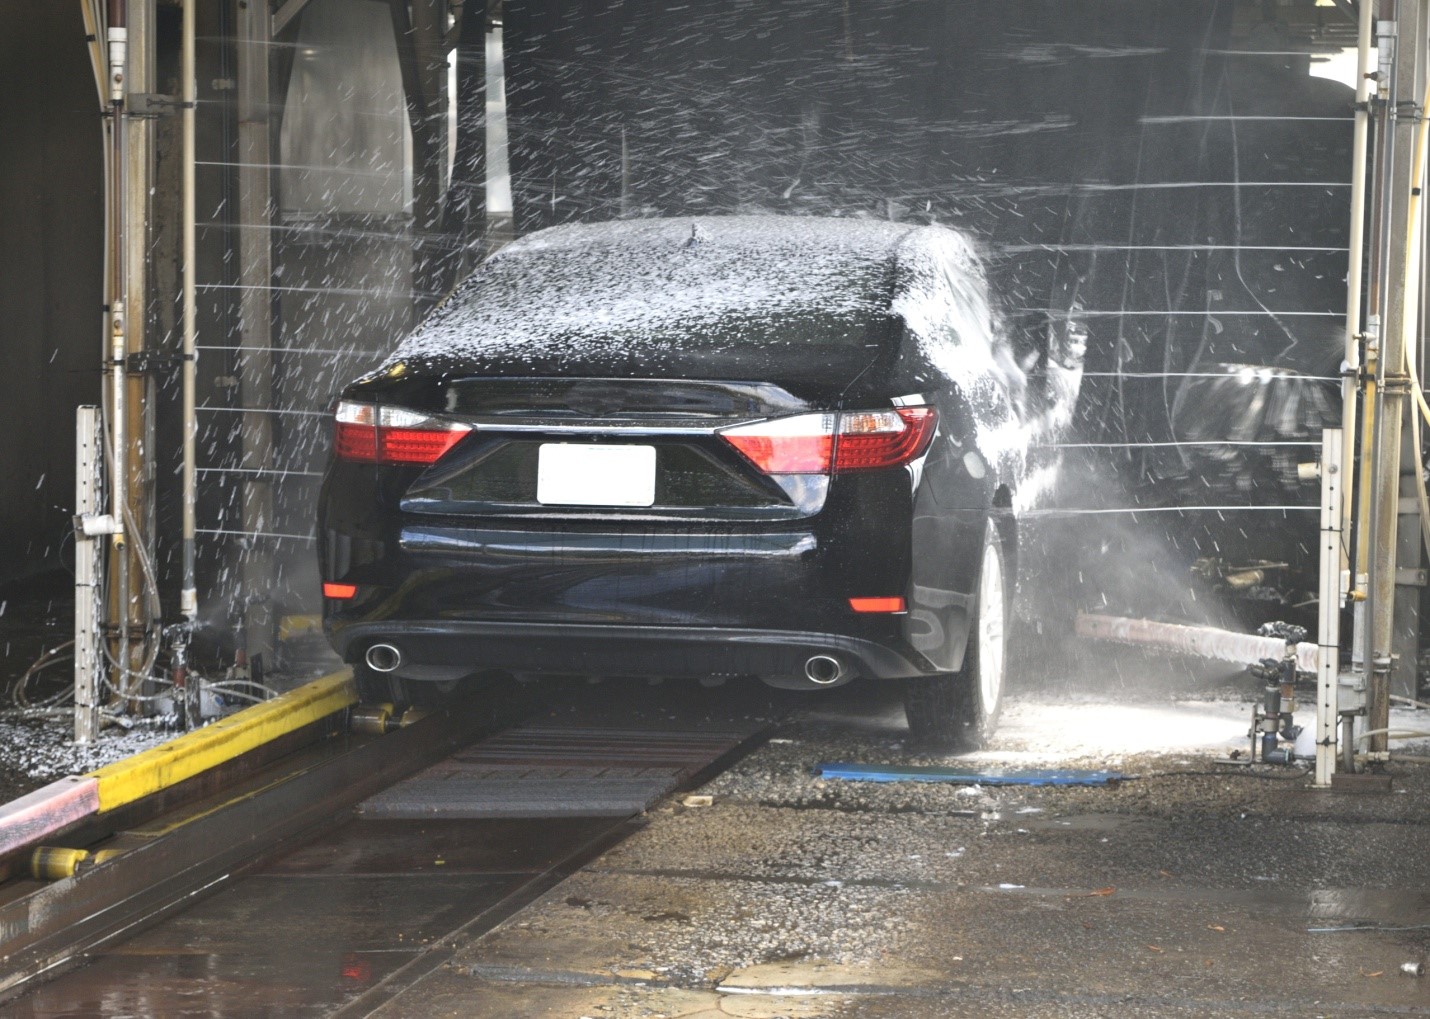 Investing in Better Car Wash Equipment and Supplies